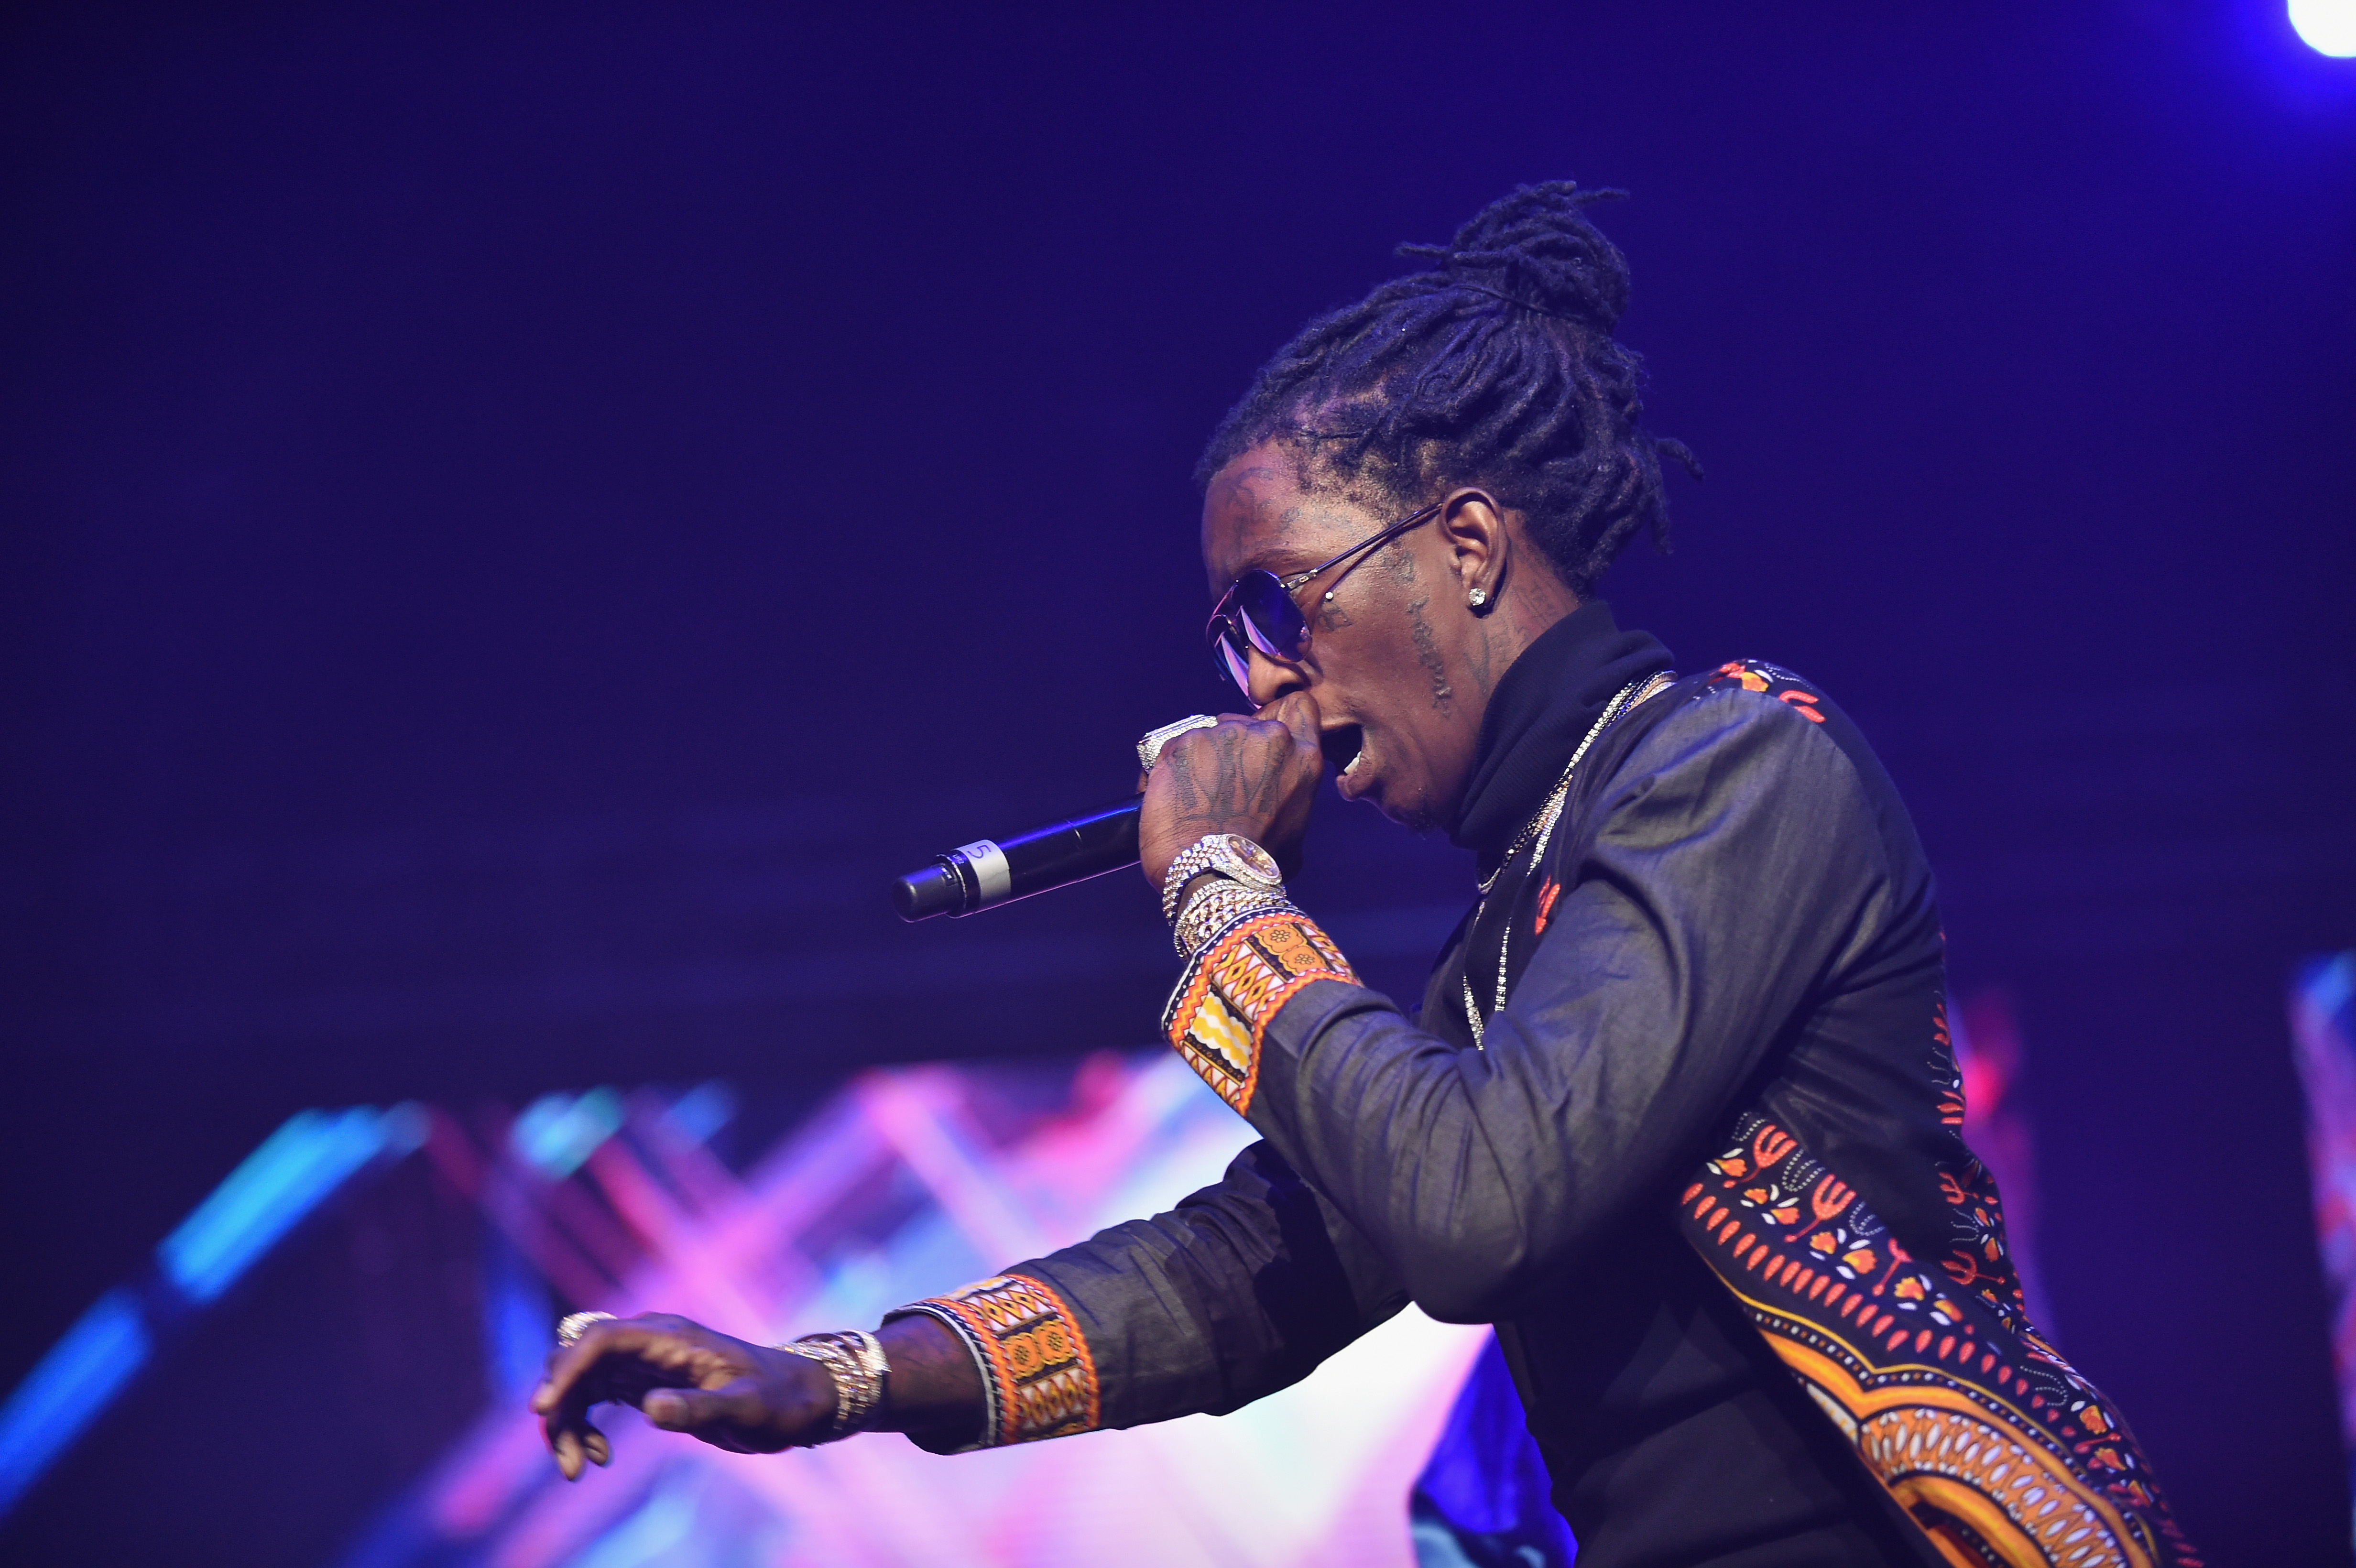 Young Thug’s New Music Video For “Wyclef Jean” | The Urban Daily